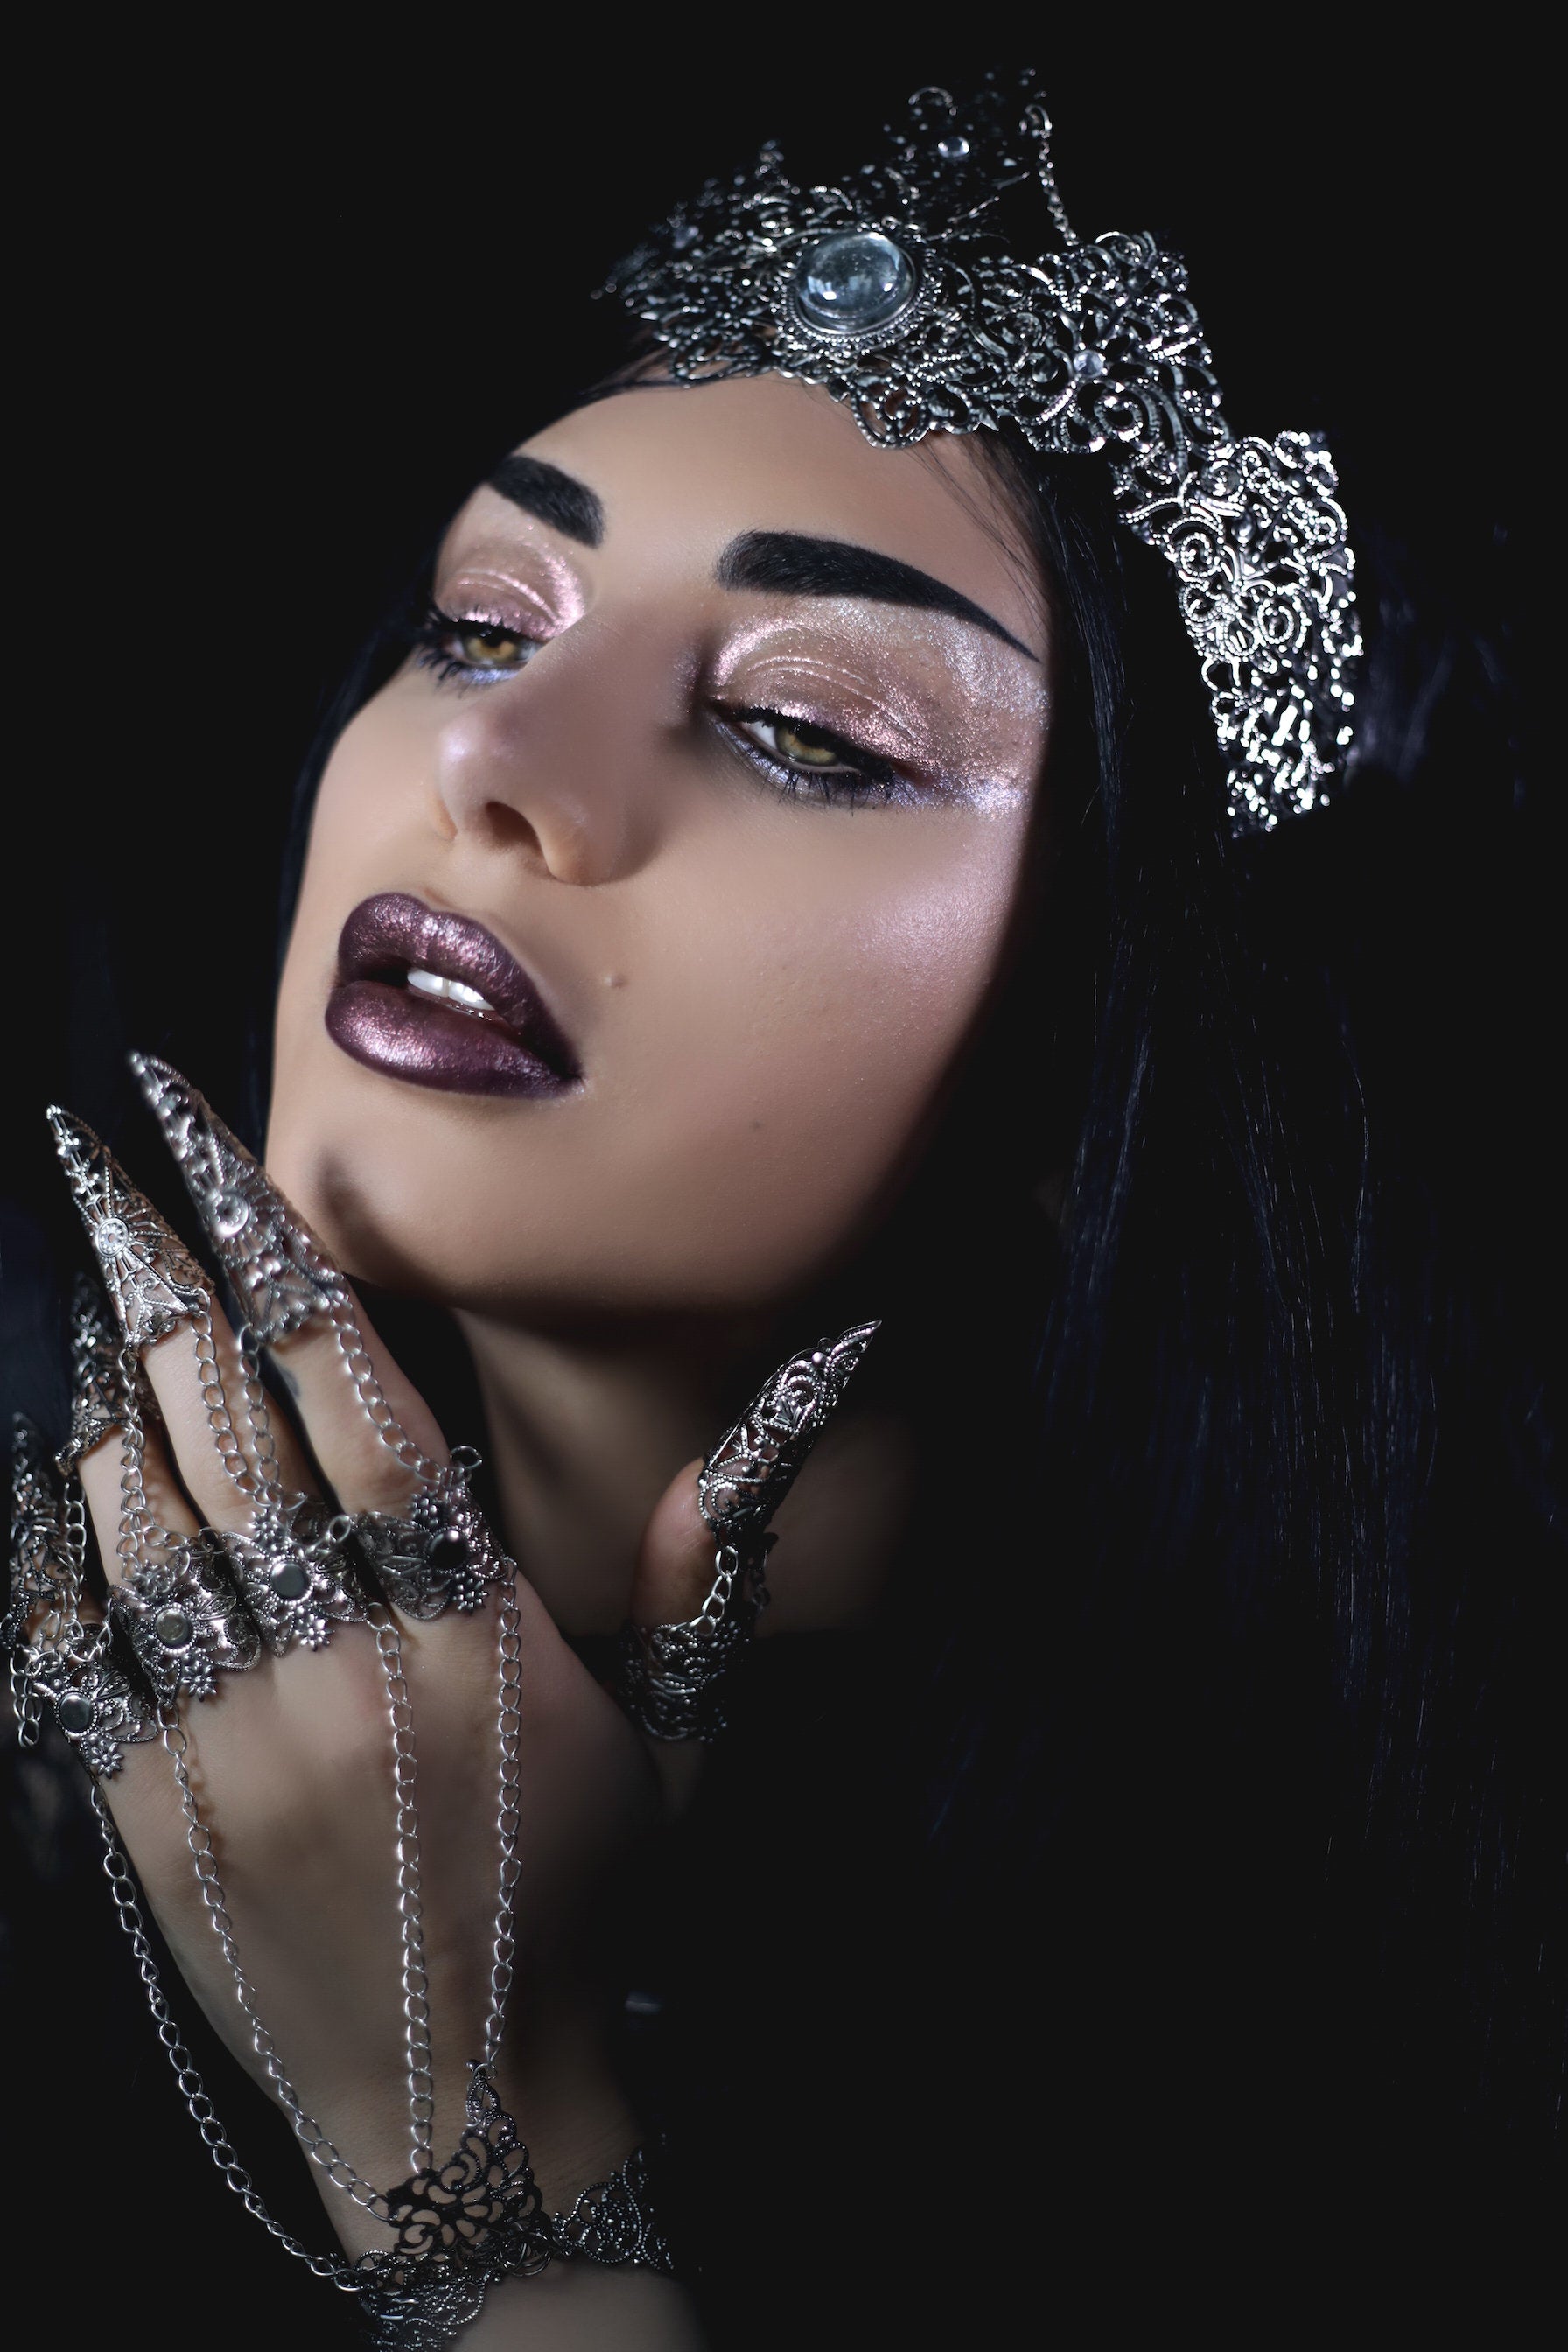 Portrait of a woman embodying gothic elegance with shimmering dark makeup and silver jewelry, including a detailed headpiece, chain-linked claw rings, and an ornate necklace, resonating with a vampiric goth aesthetic.